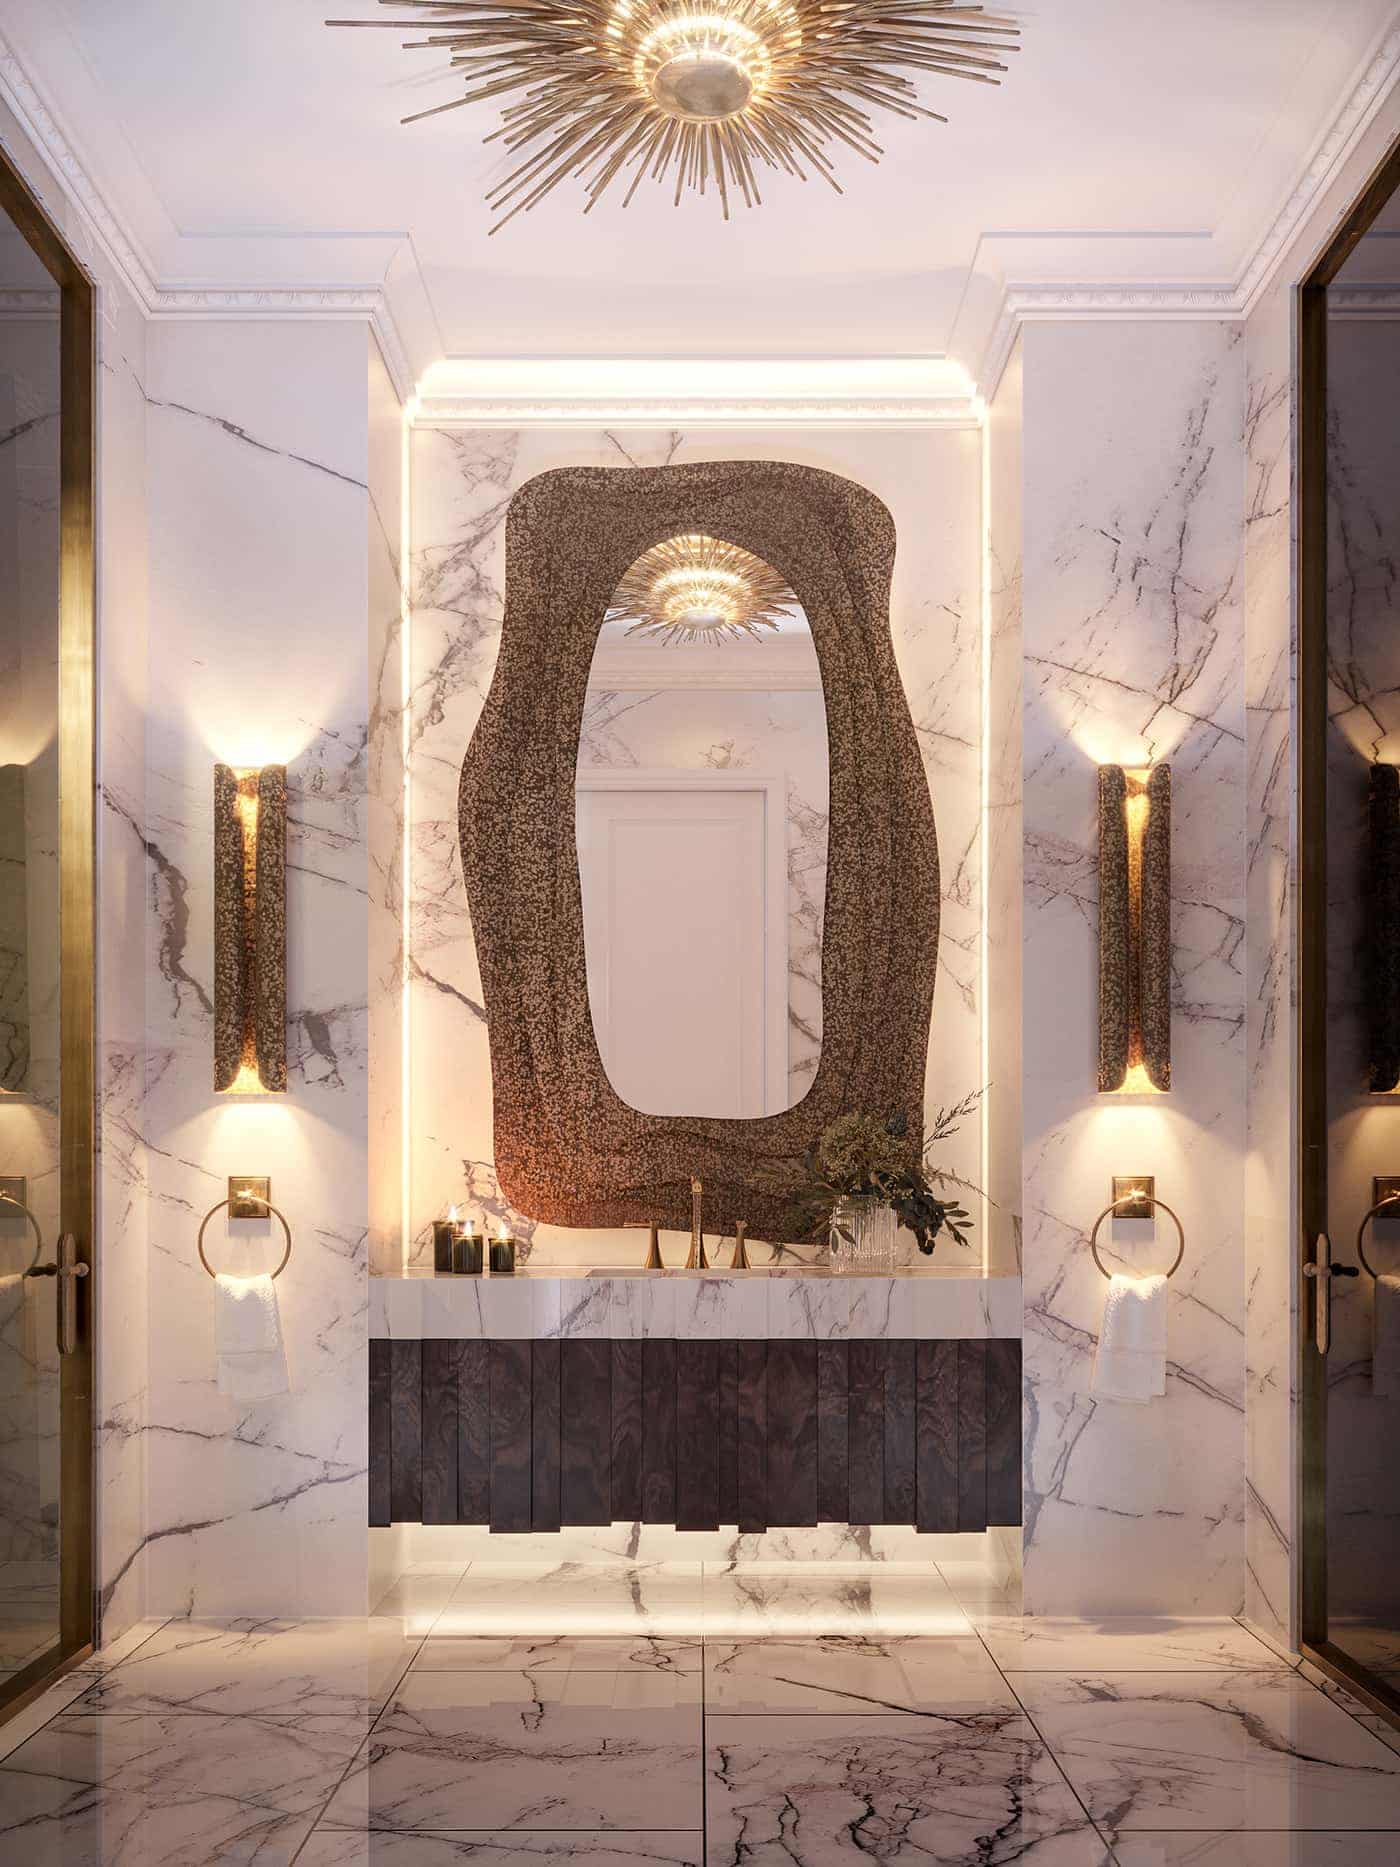 wall sconces installed on the sides of mirror in bathroom, white marble , lavish and beautiful bathroom